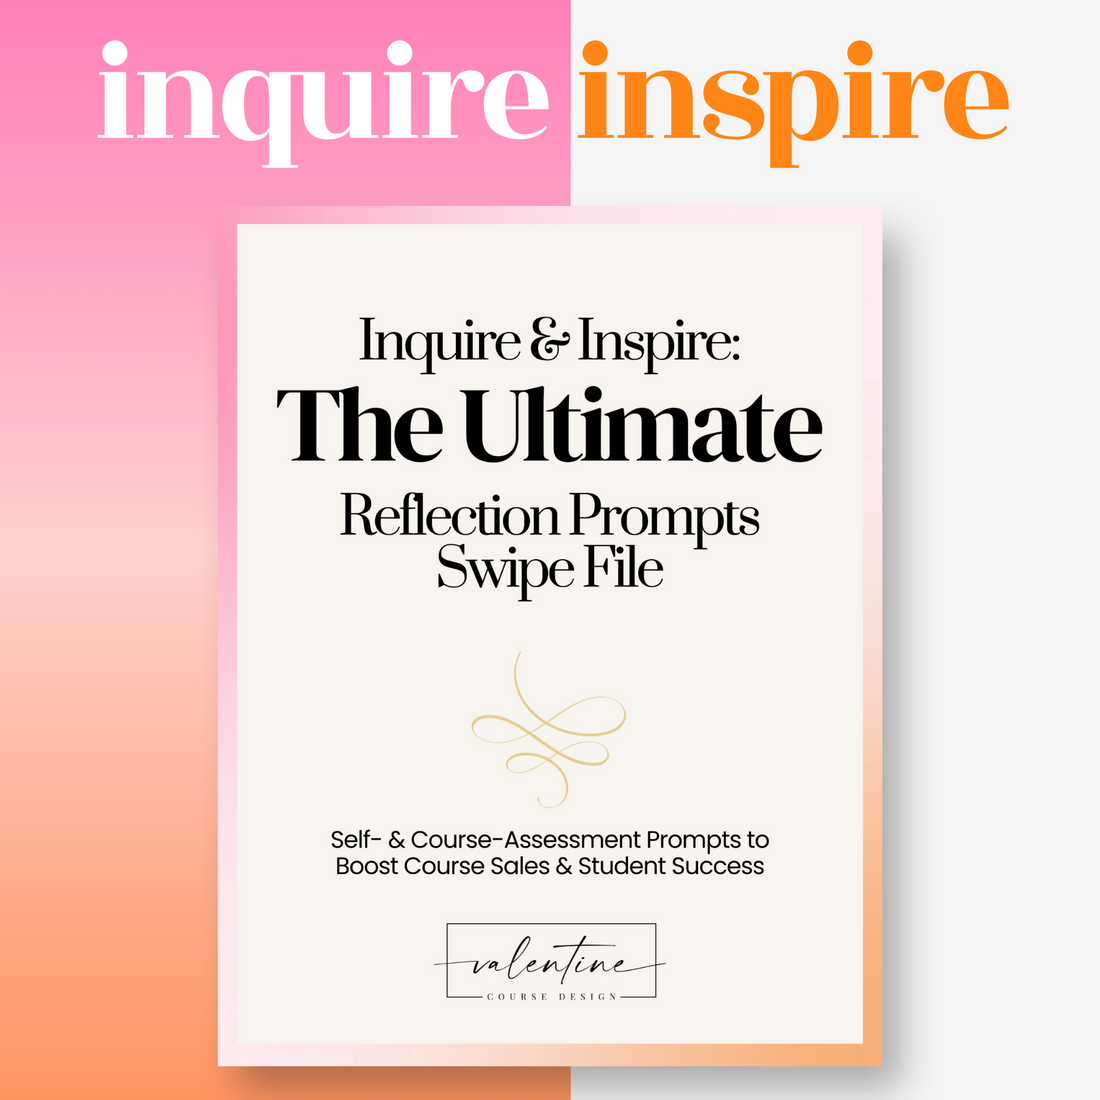 Inquire &amp; Inspire: The Ultimate Reflection Prompts Swipe File